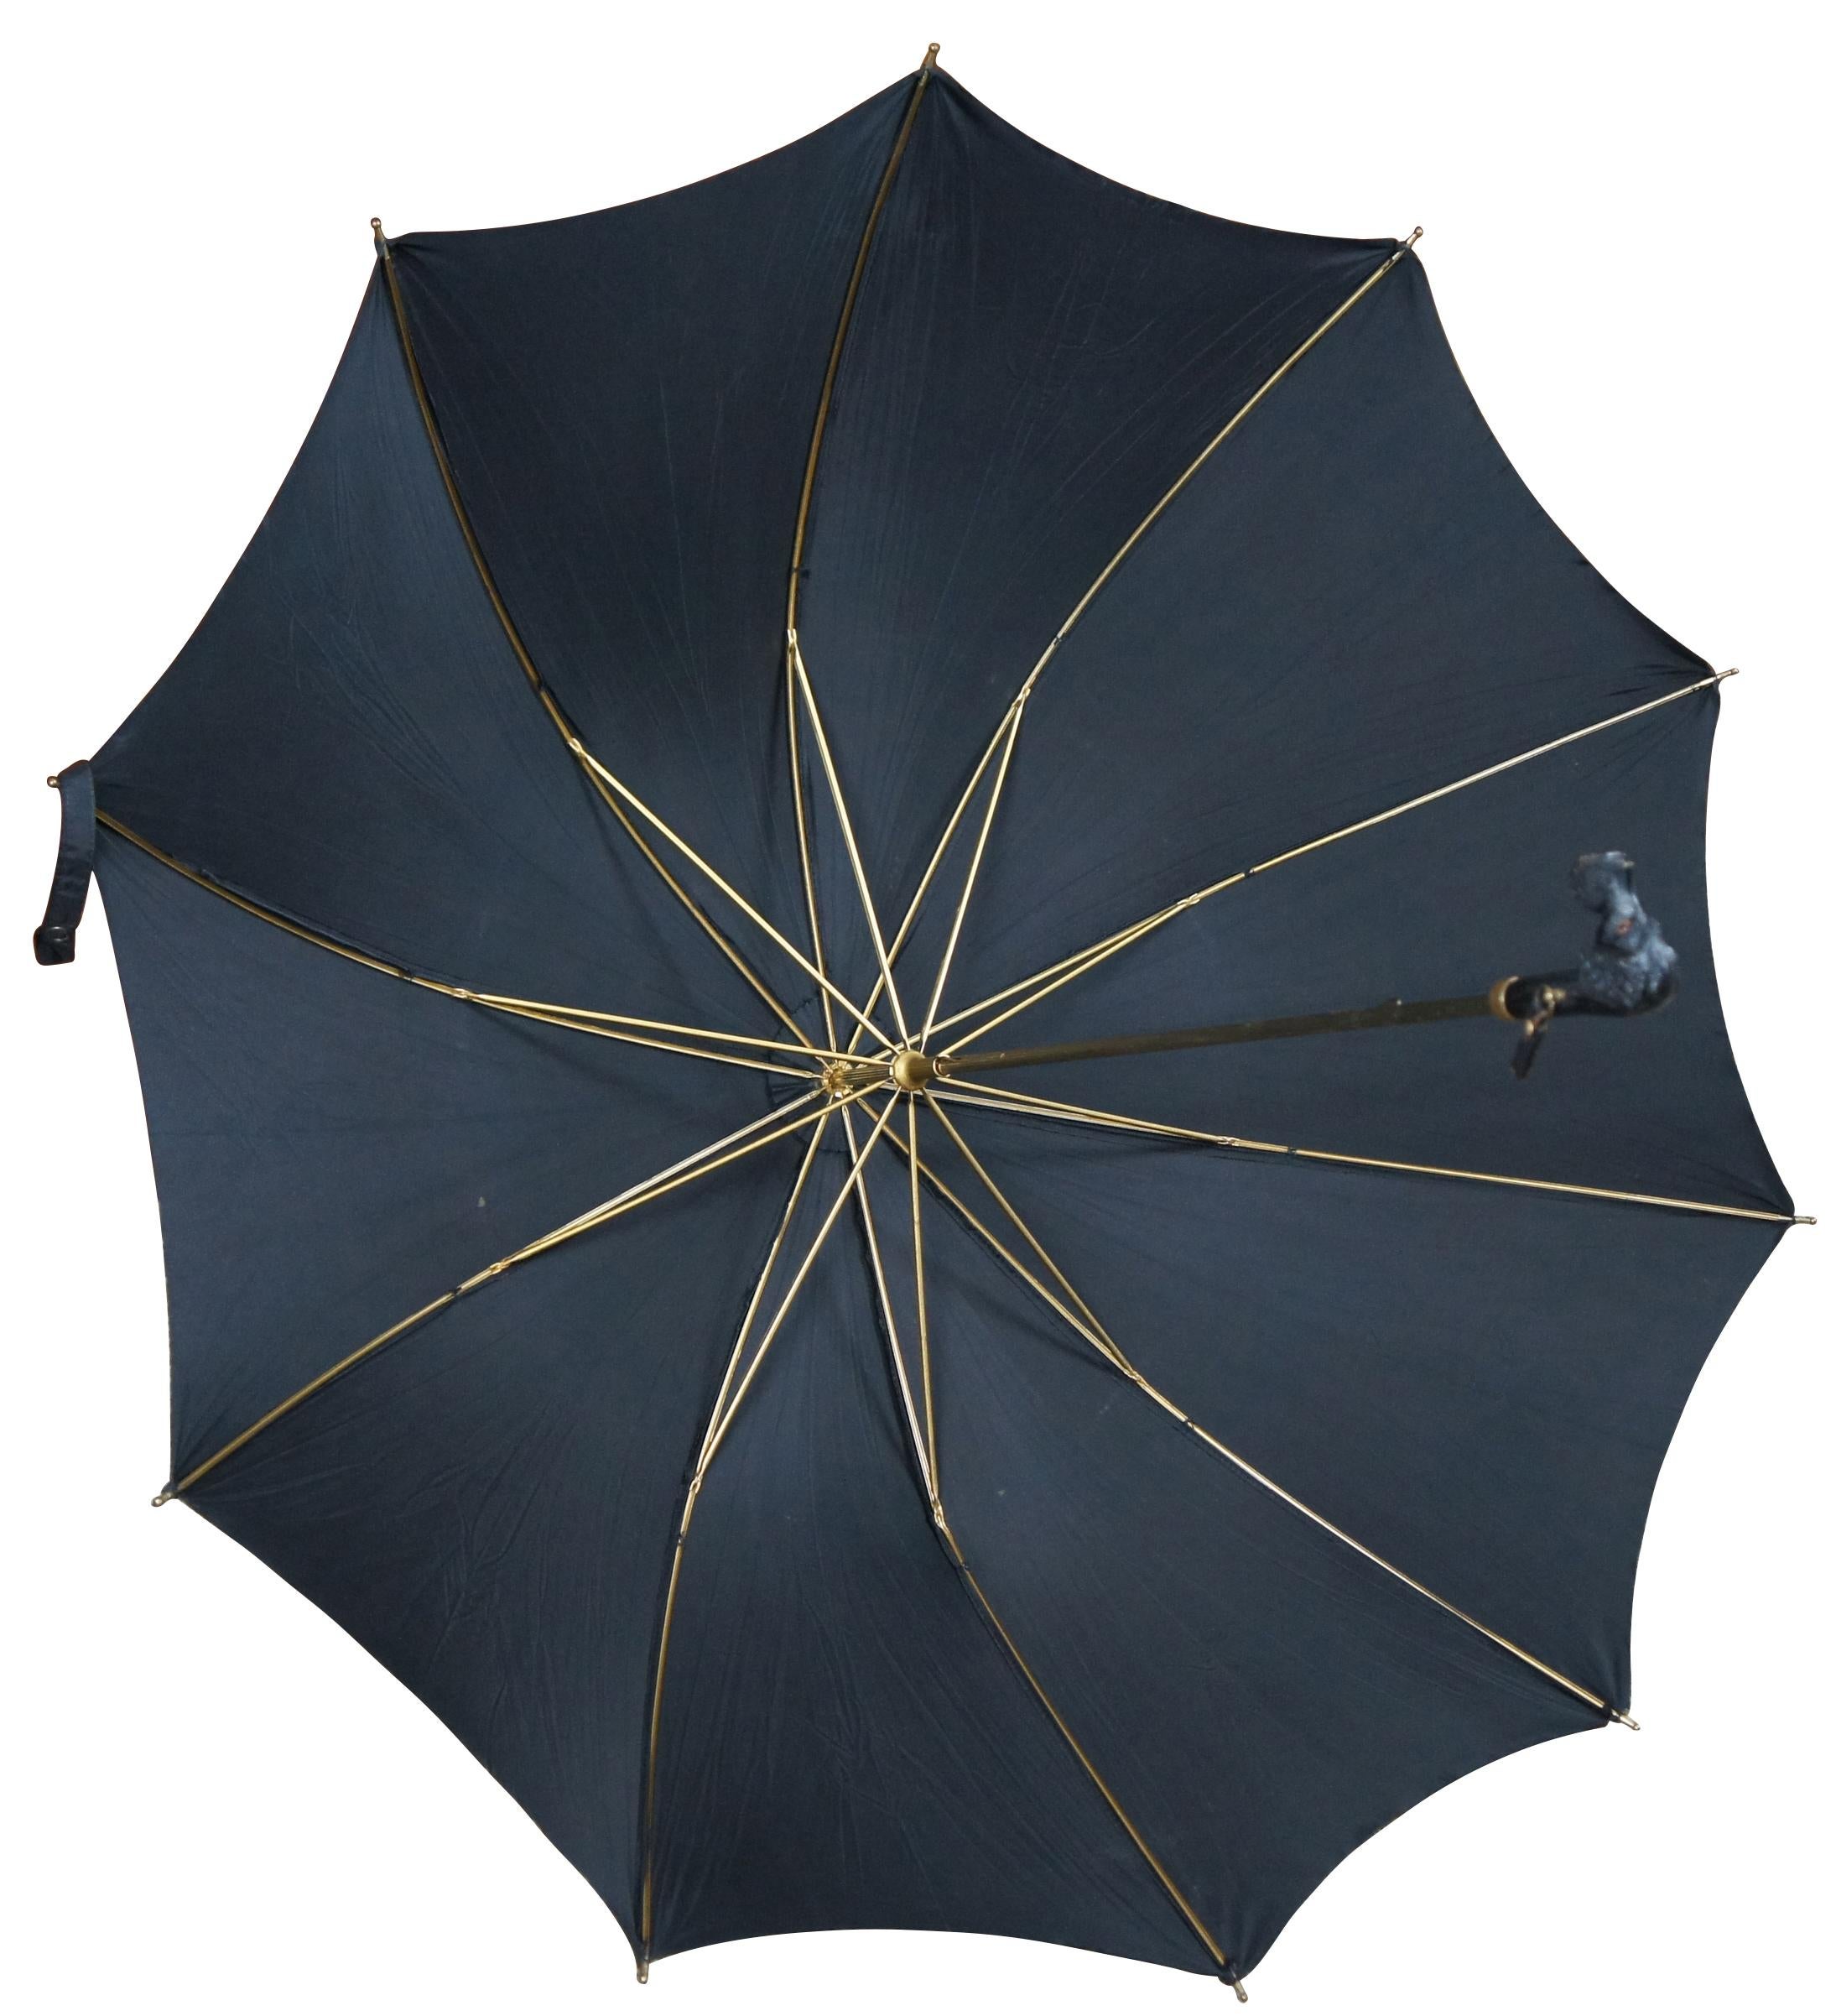 Rare vintage black umbrella with Scottish Terrier dog head handle and brass tip; marked ABC at the dog’s neck.

Folded - 2.5” x 1.25” x 25” / Diameter Open – 32.75” (Width x Depth x Length/Diameter).